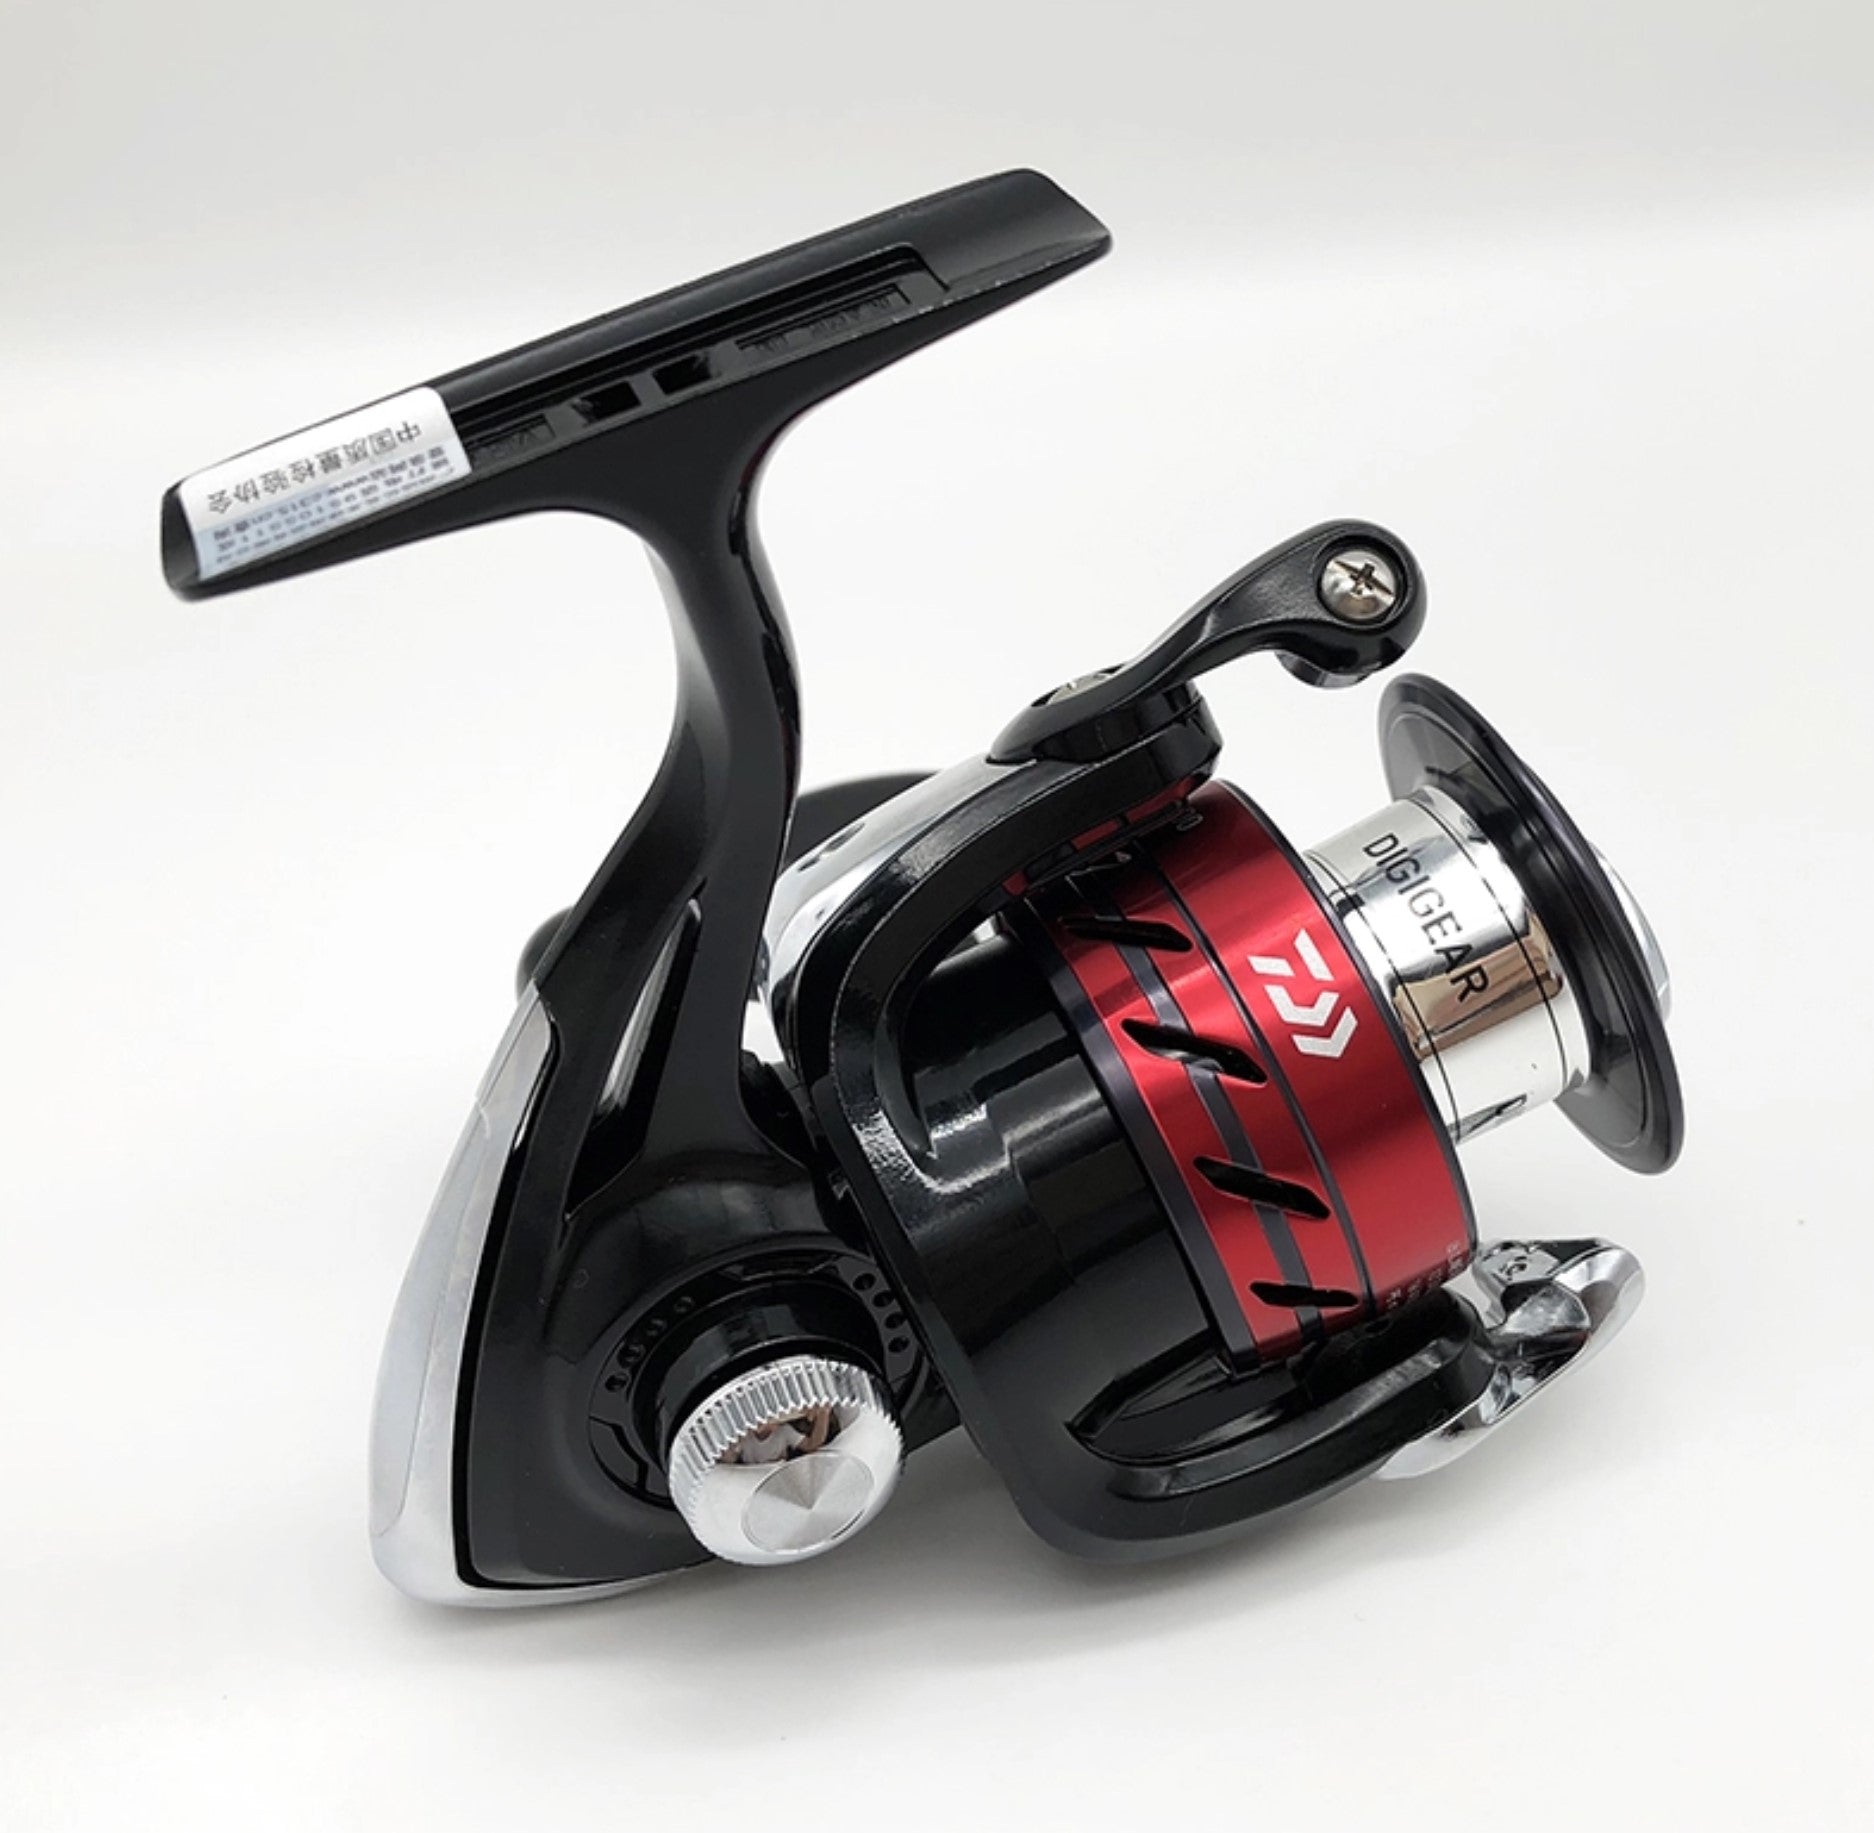 Fishing Reel Daiwa Sweepfire 2000-2B and 4000-2B and 4500-2B Spinning Reels  at best price in Hyderabad